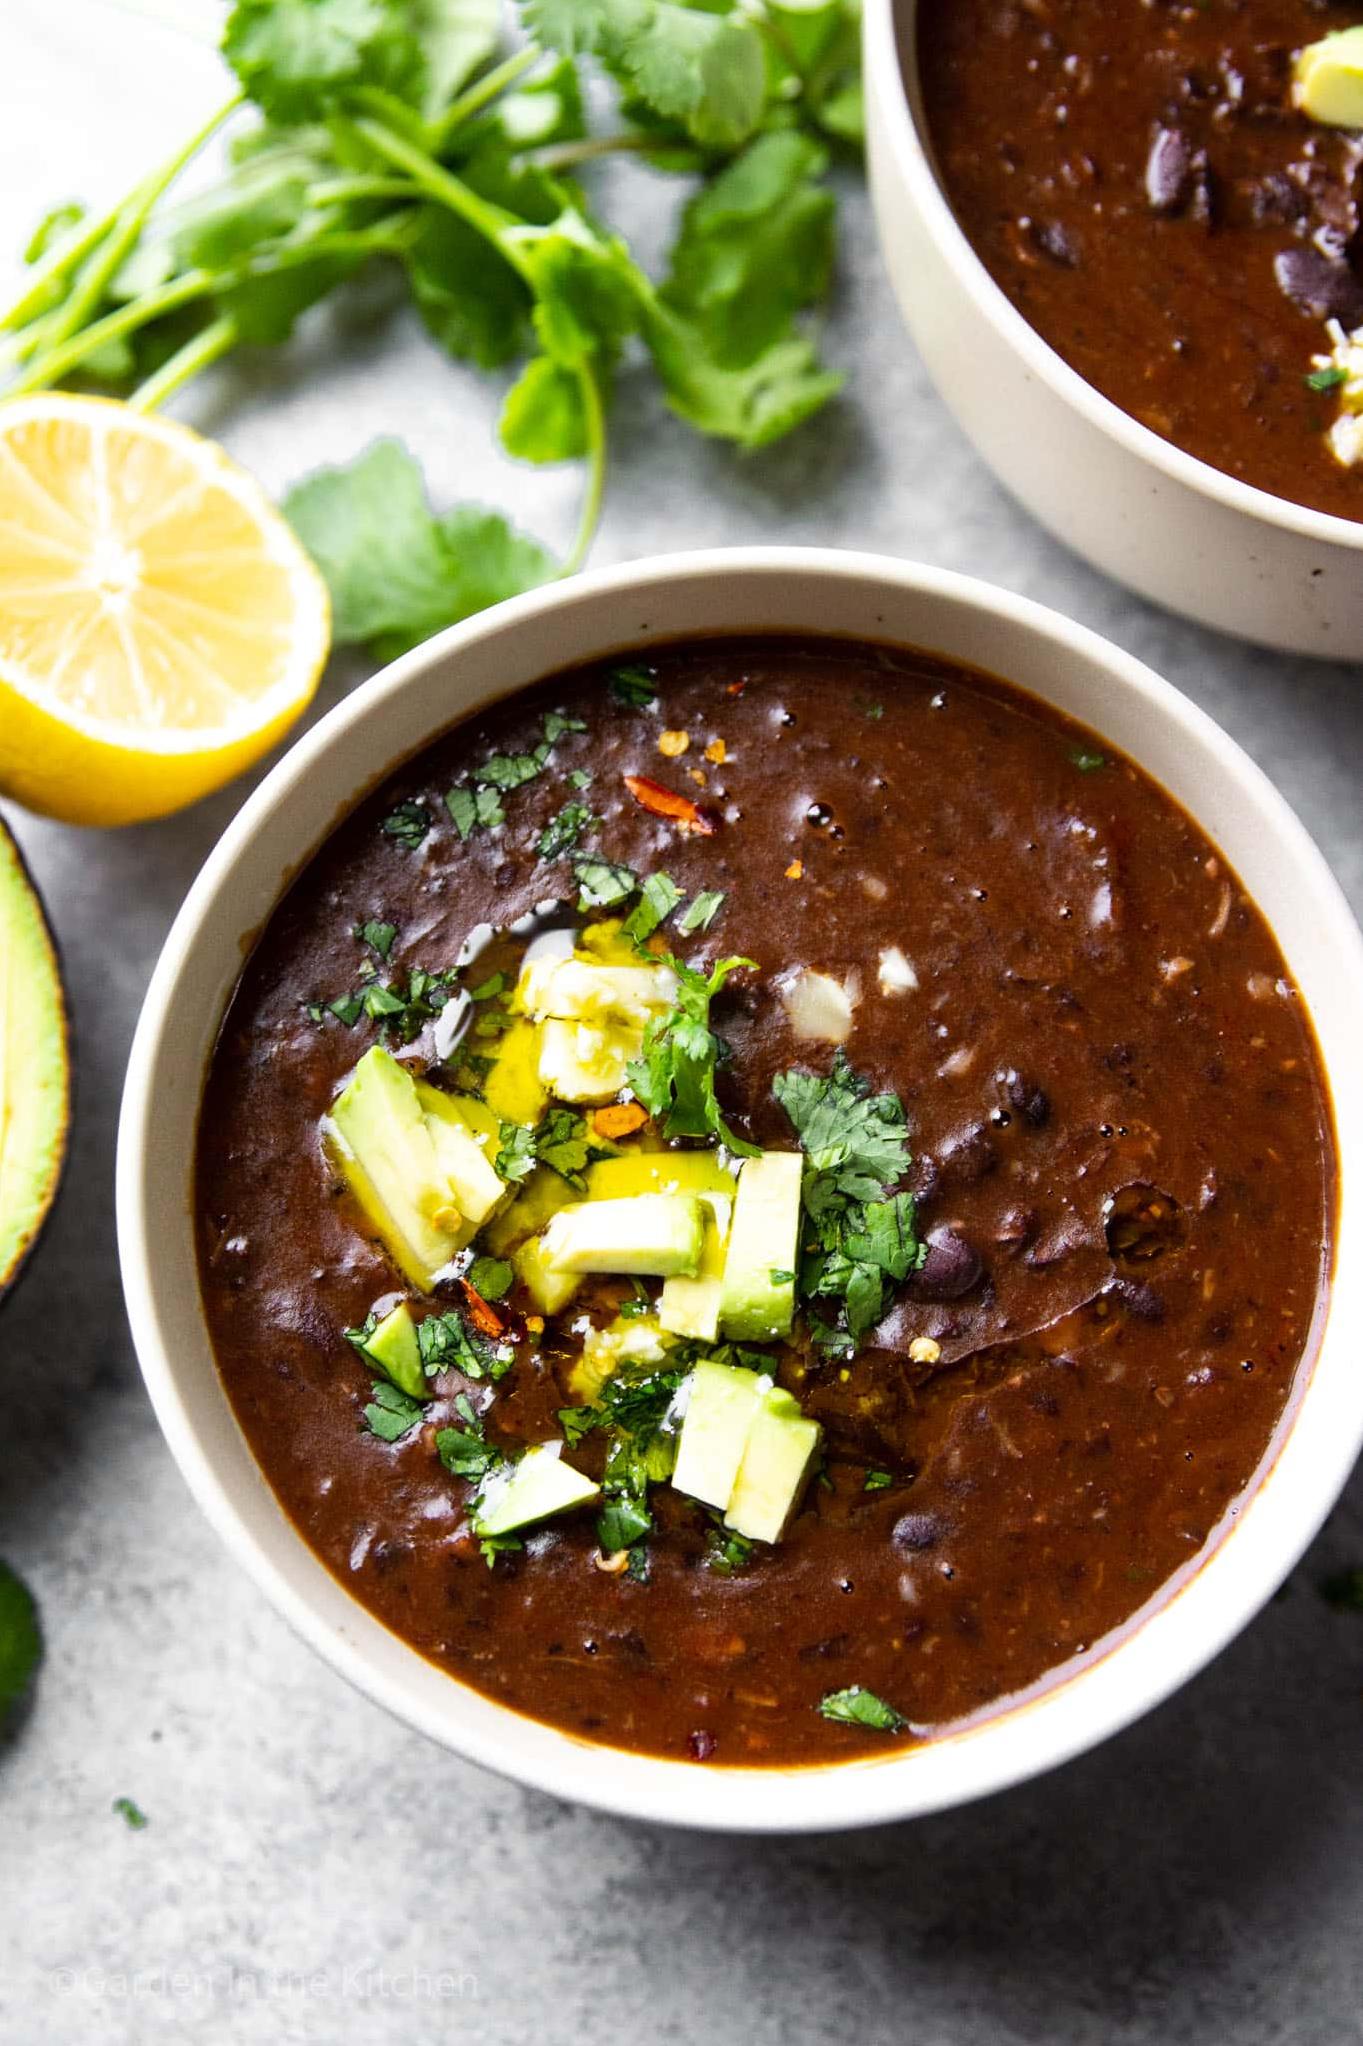  This soup is perfect for vegetarians and meat-eaters alike, and can easily be made vegan.